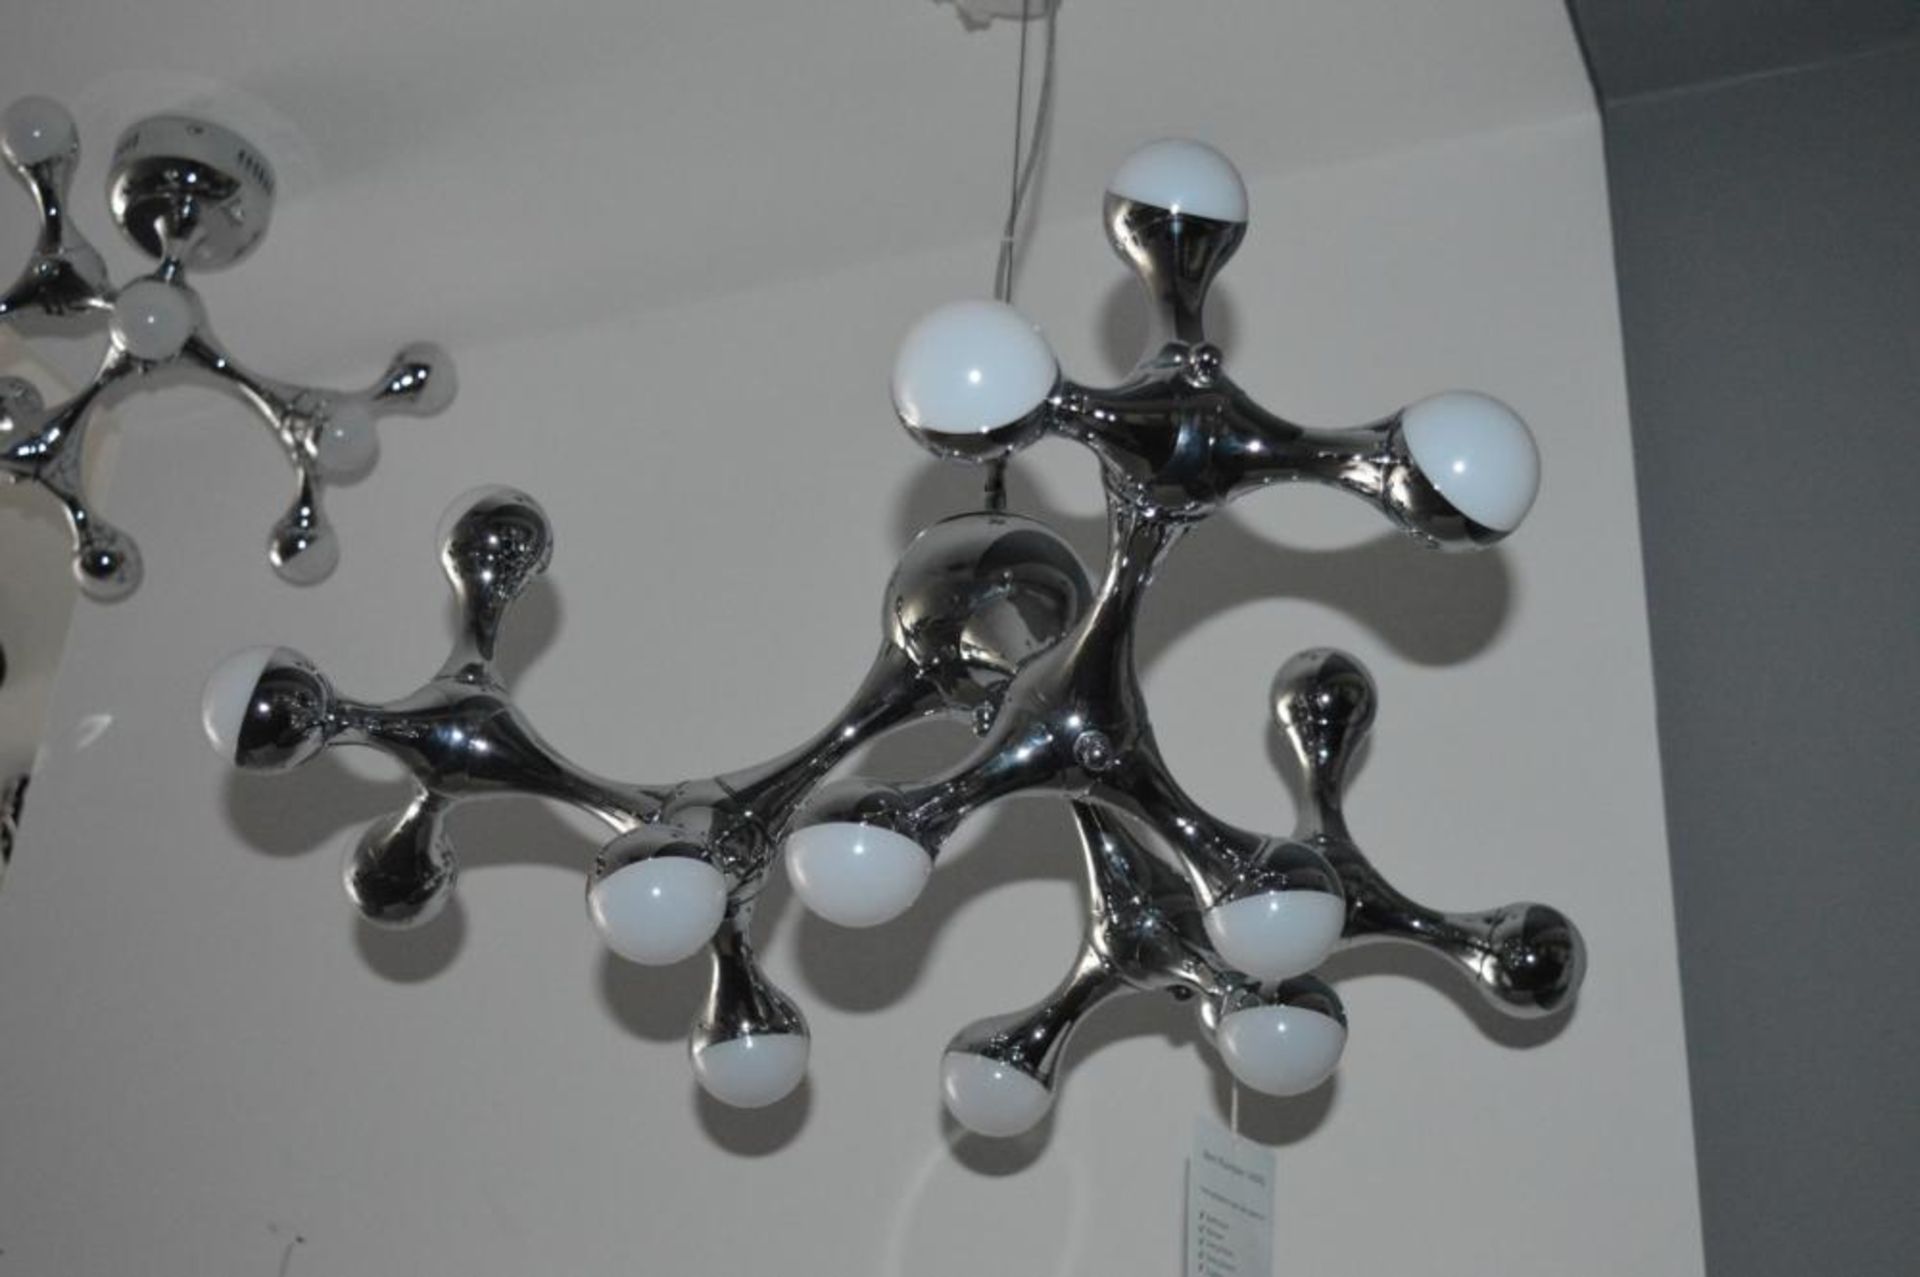 1 x DNA Chrome 15 LED Ceiling Light With Half Dome Shades - Contemporary European Design - Inspired - Image 2 of 6